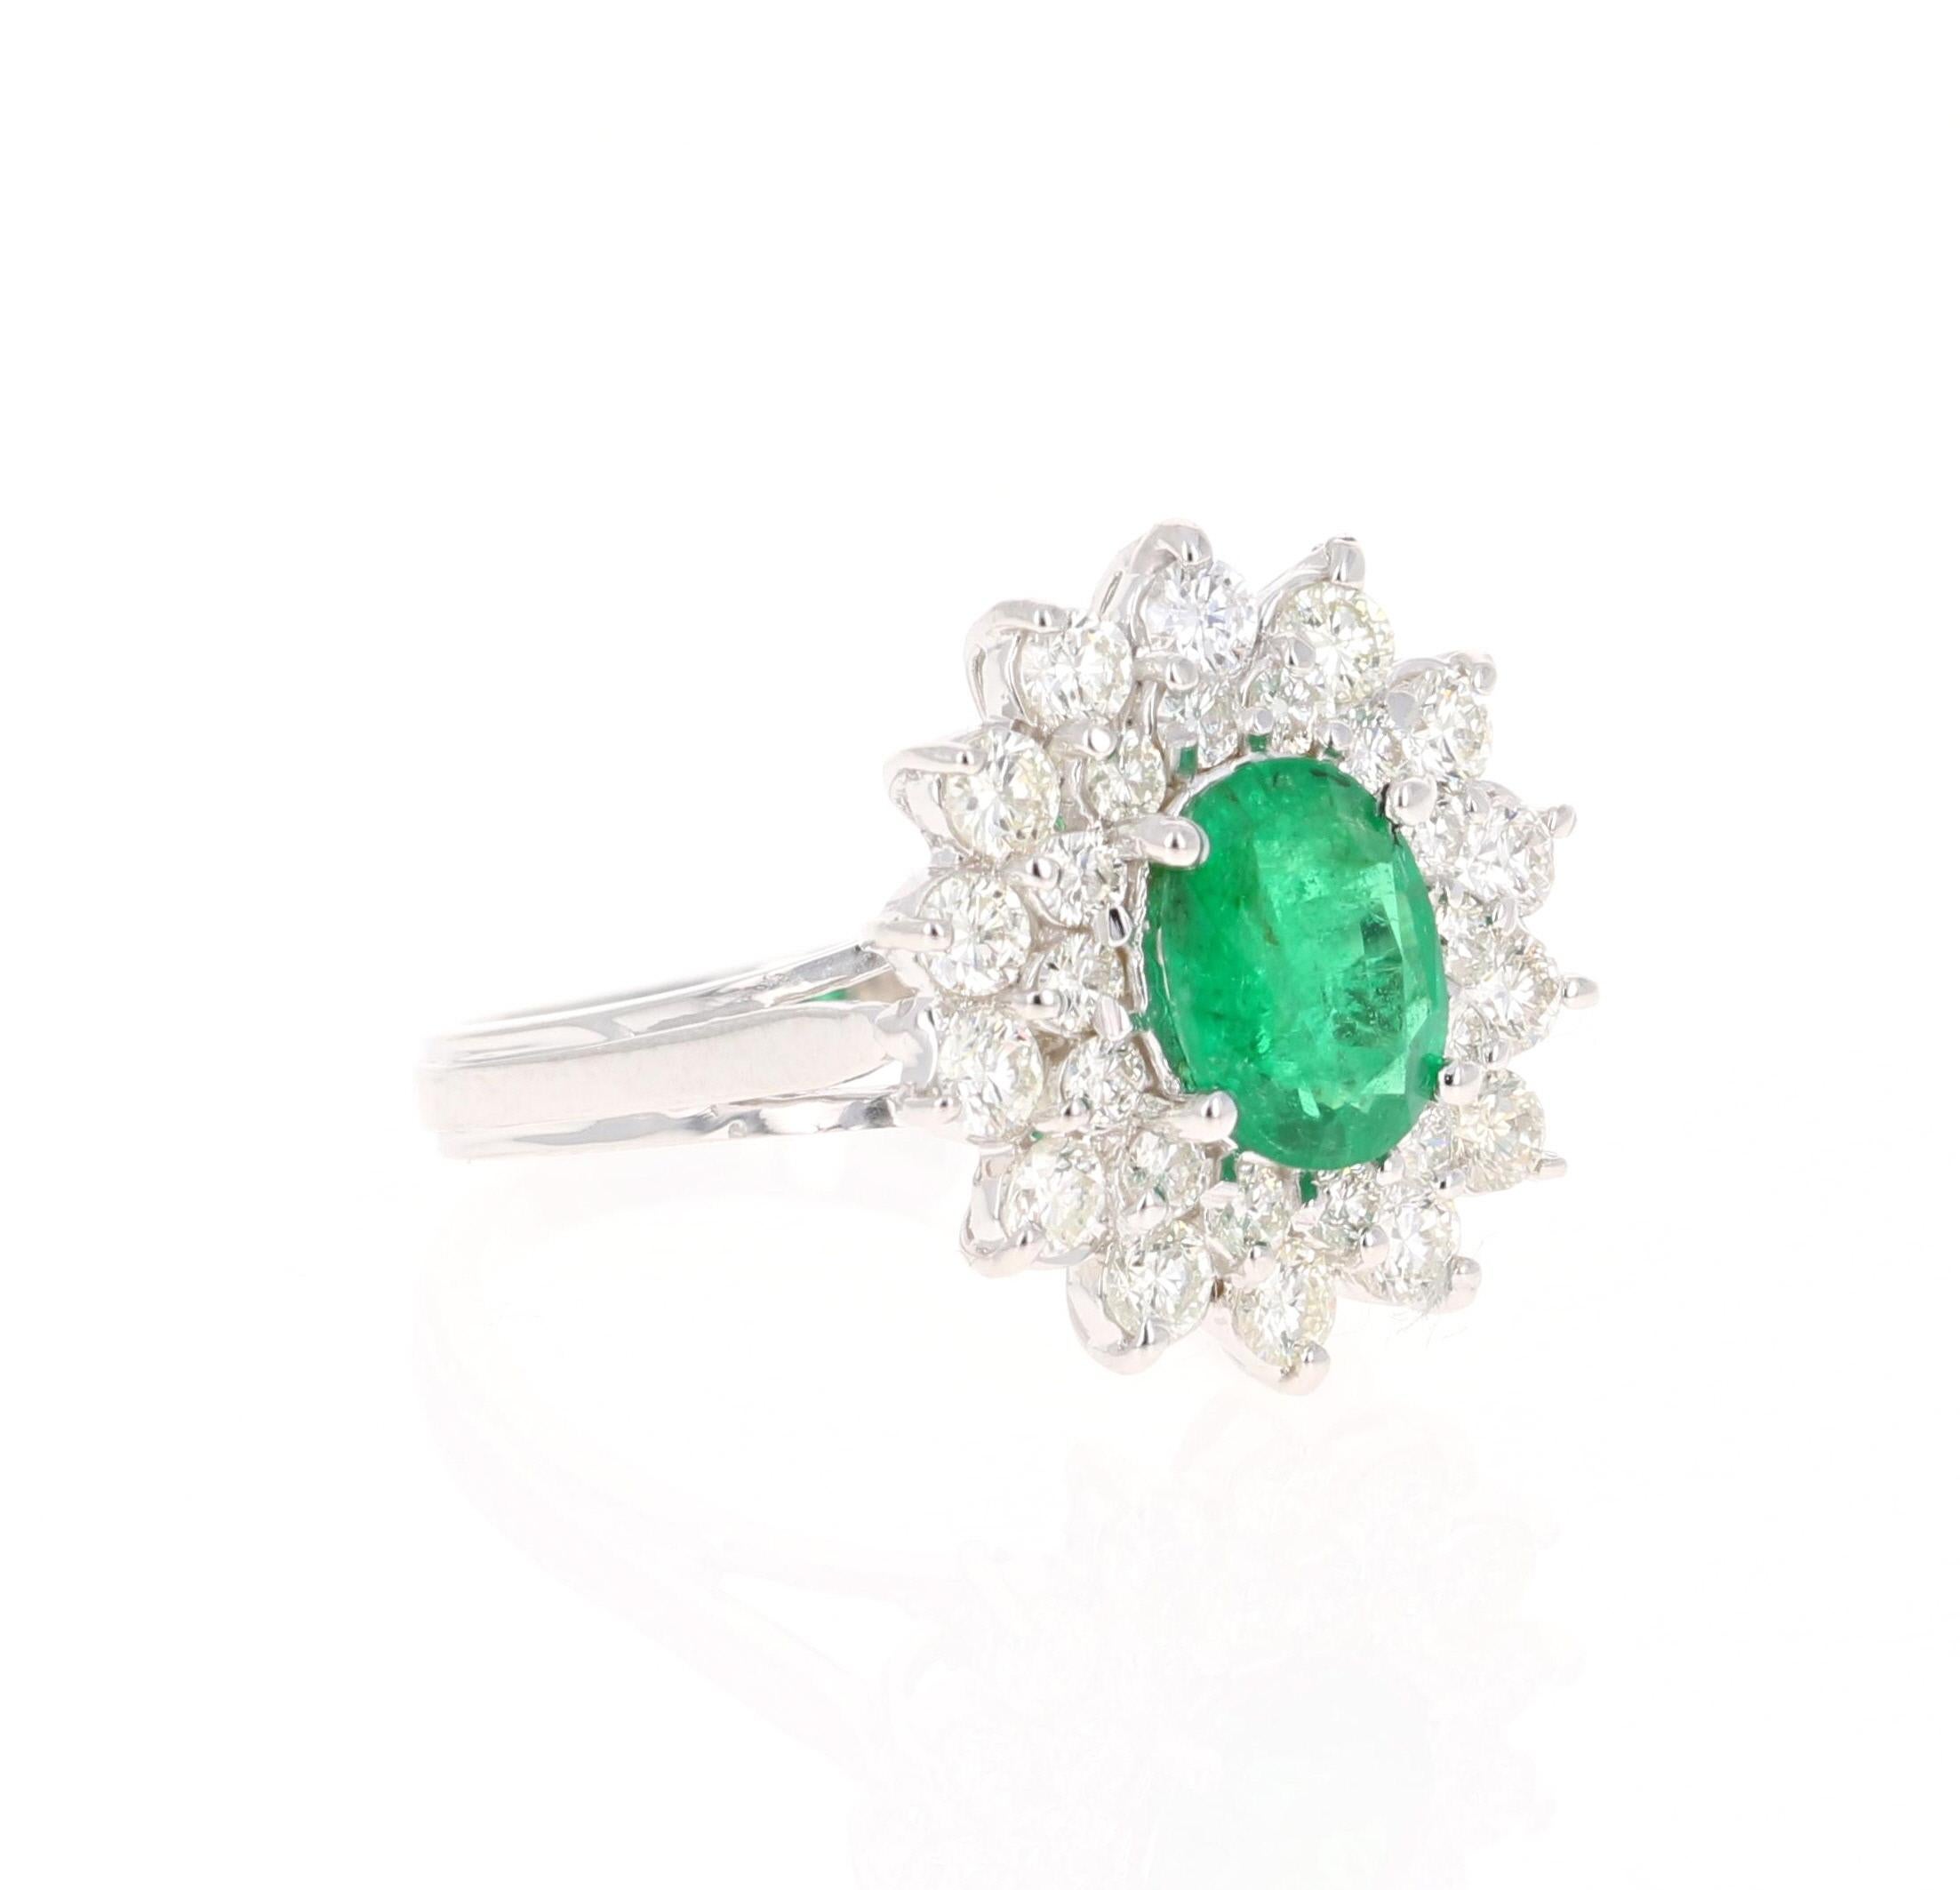 A beautiful 2.29 Carat Emerald and Diamond Ring in 18K White Gold.
This gorgeous ring has a 1.14 Carat Oval Cut Emerald that is set in the center of the ring!  The Emerald is surrounded by 28 Round Cut Diamonds that weigh 1.15 carats. The Clarity is